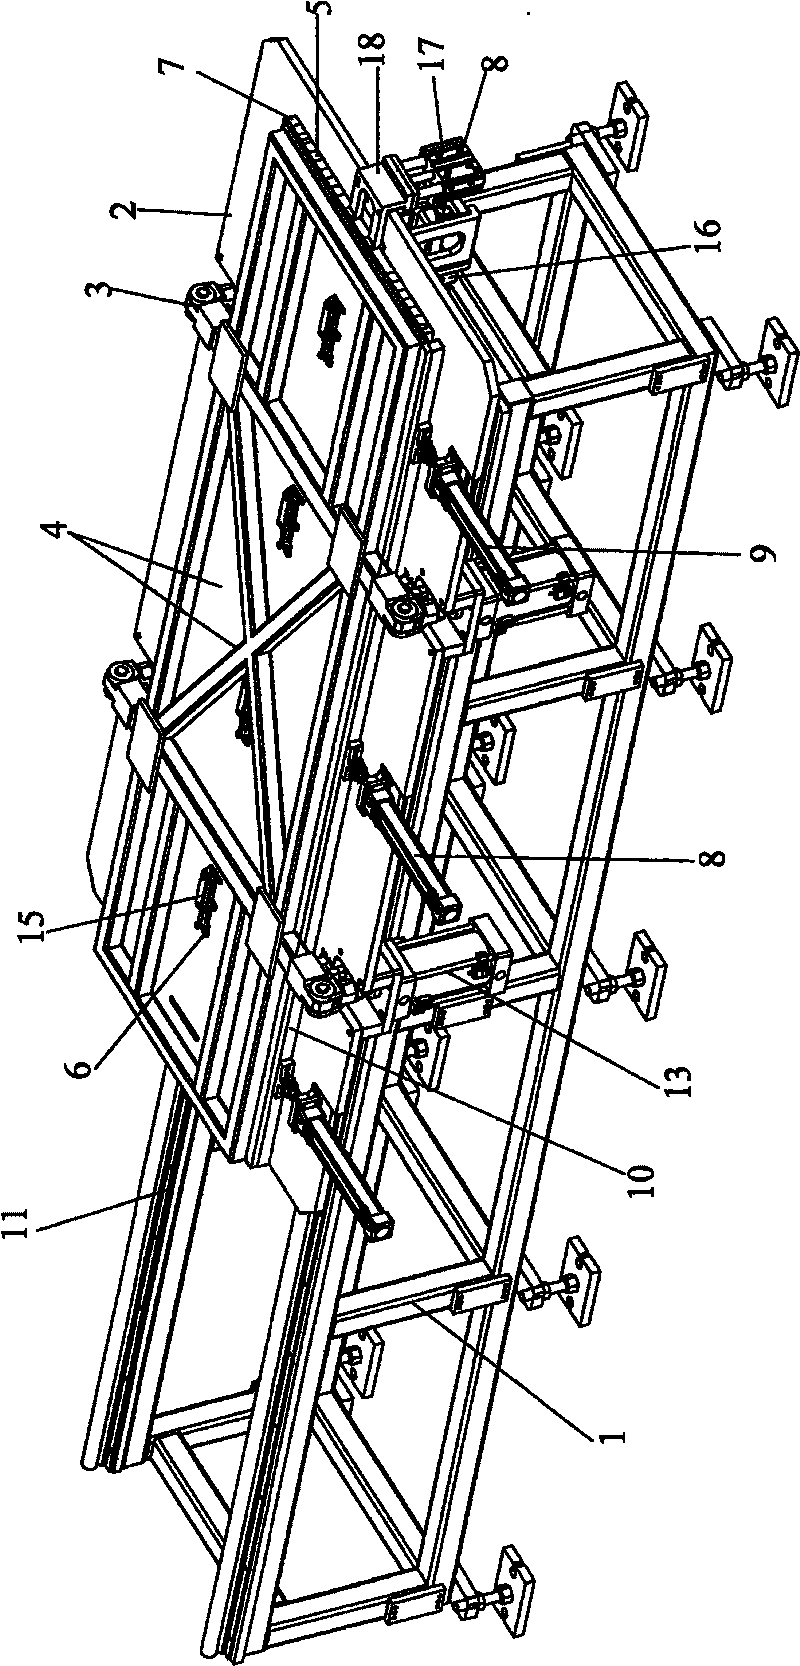 Continuous production method of foam filling panel